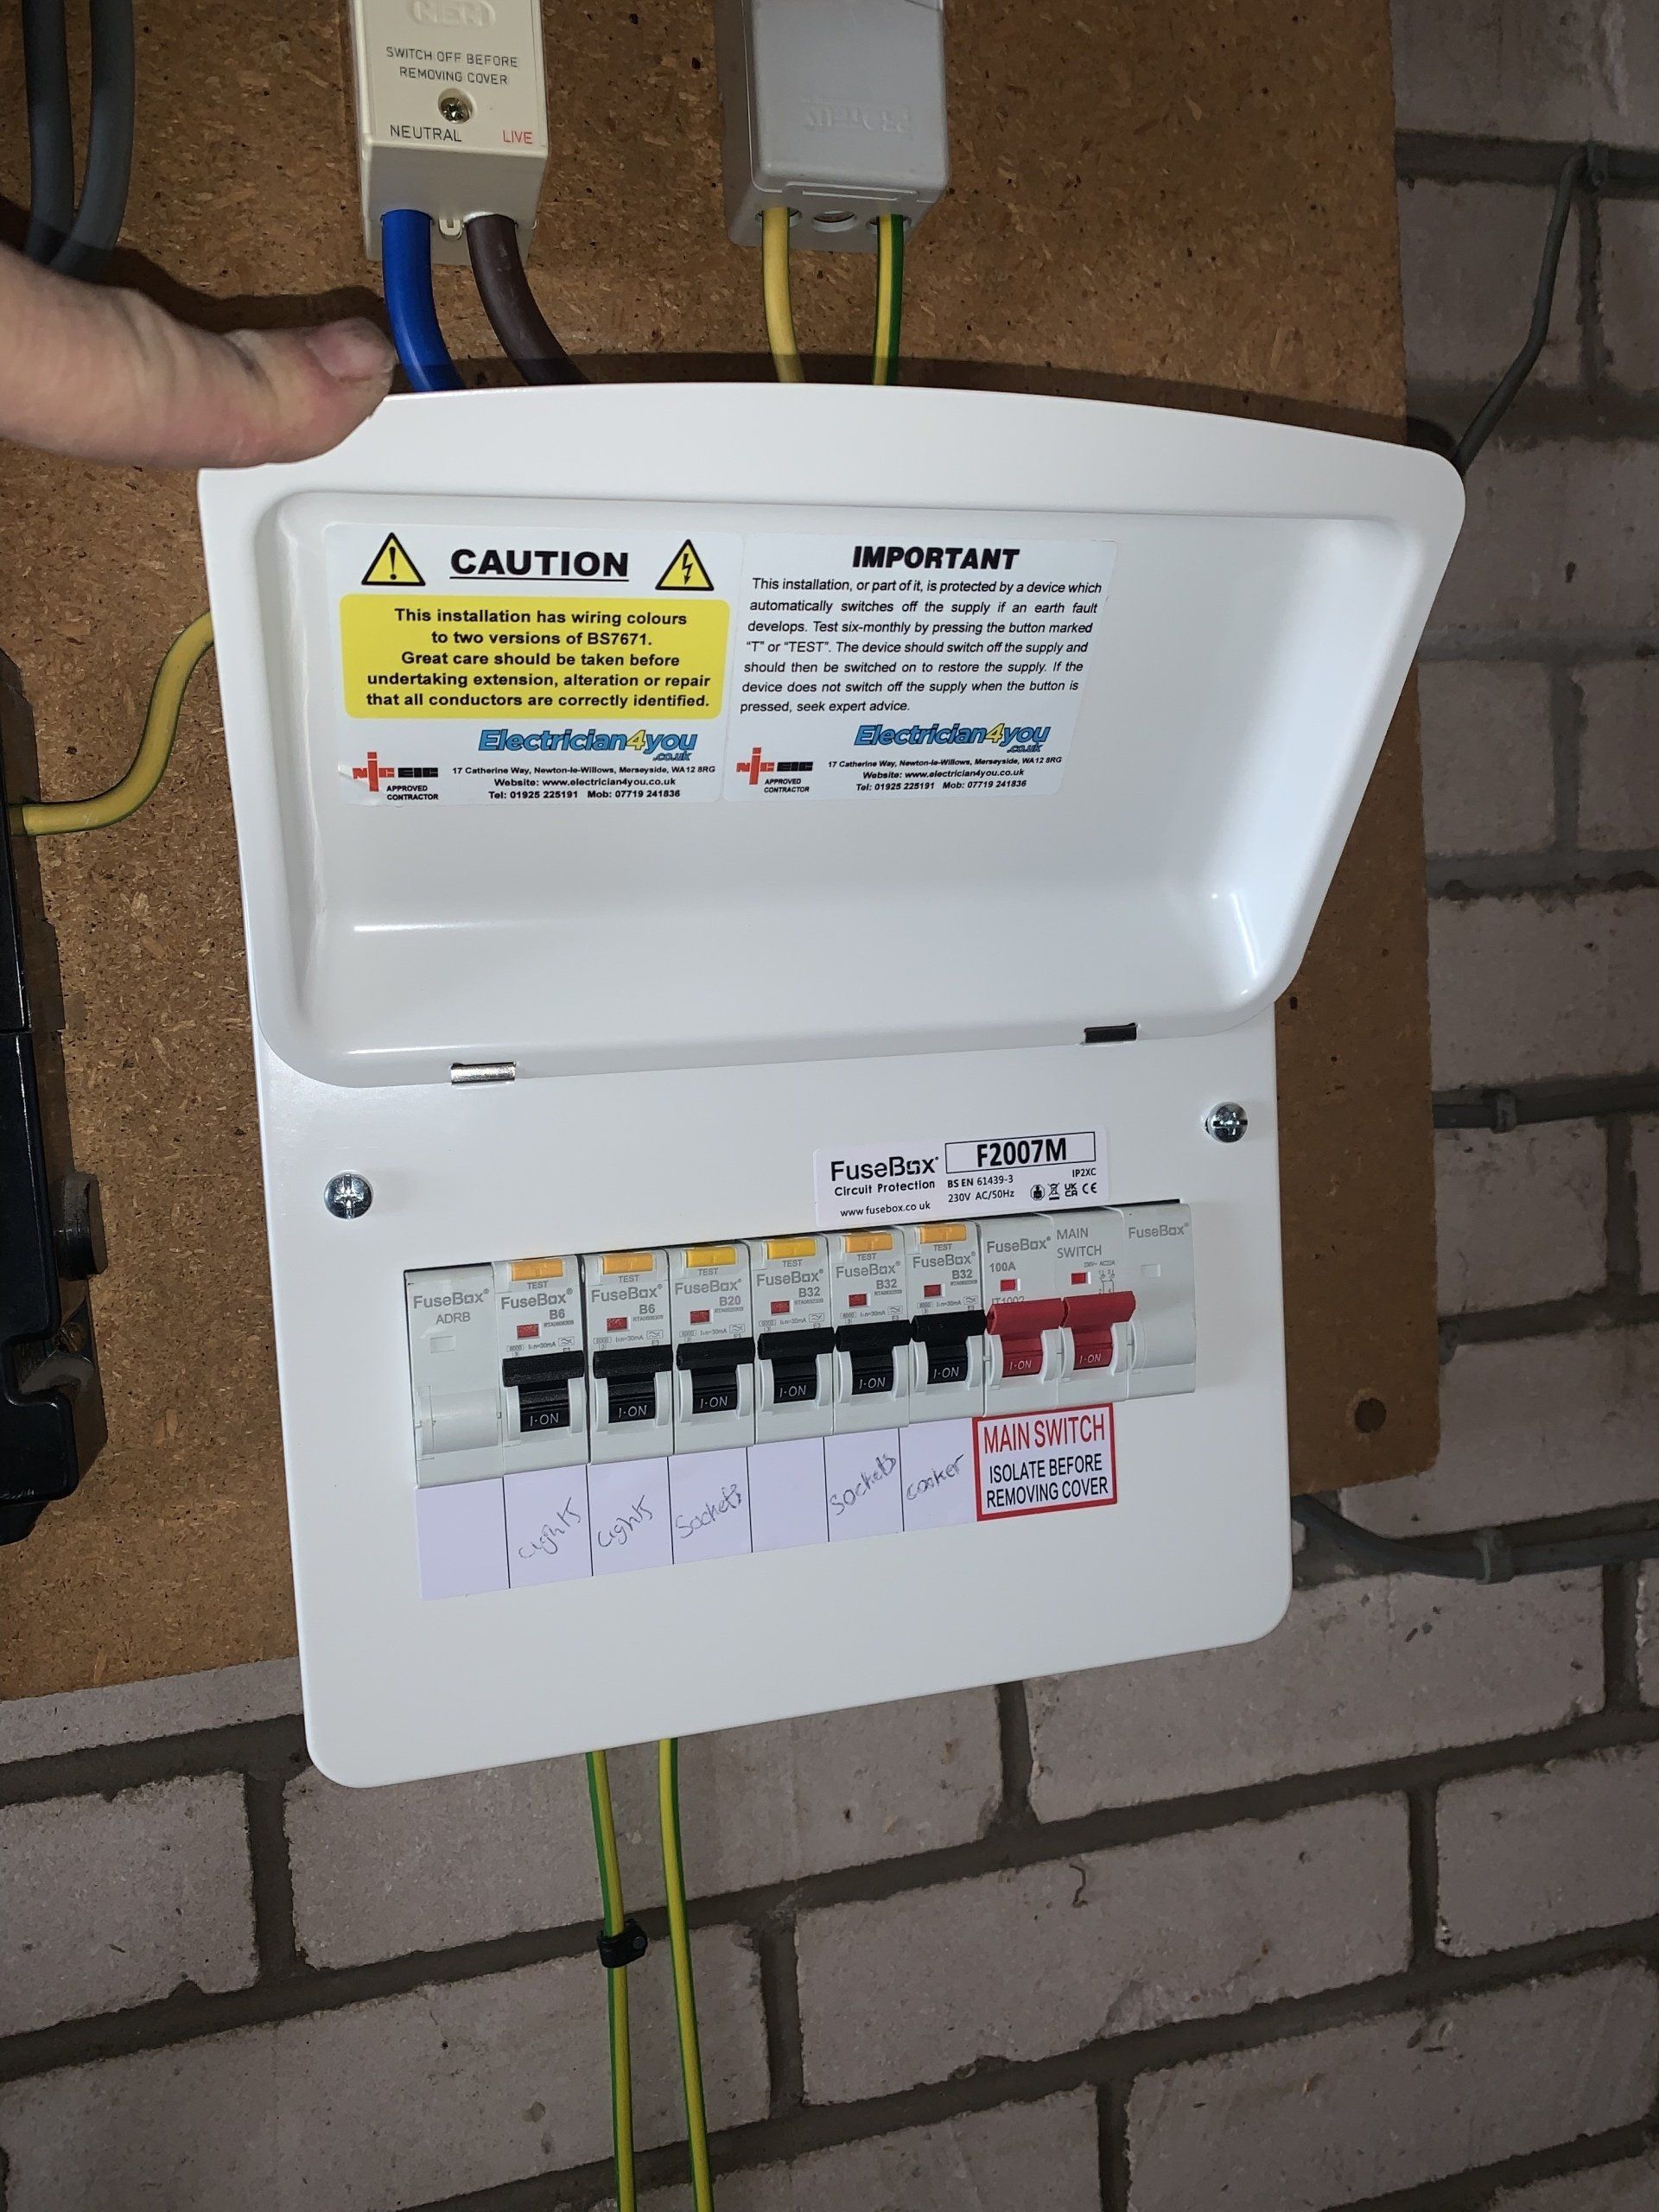 Fuse box upgrade in St. Helens by electrician4you in preparation of a new electric car charger.